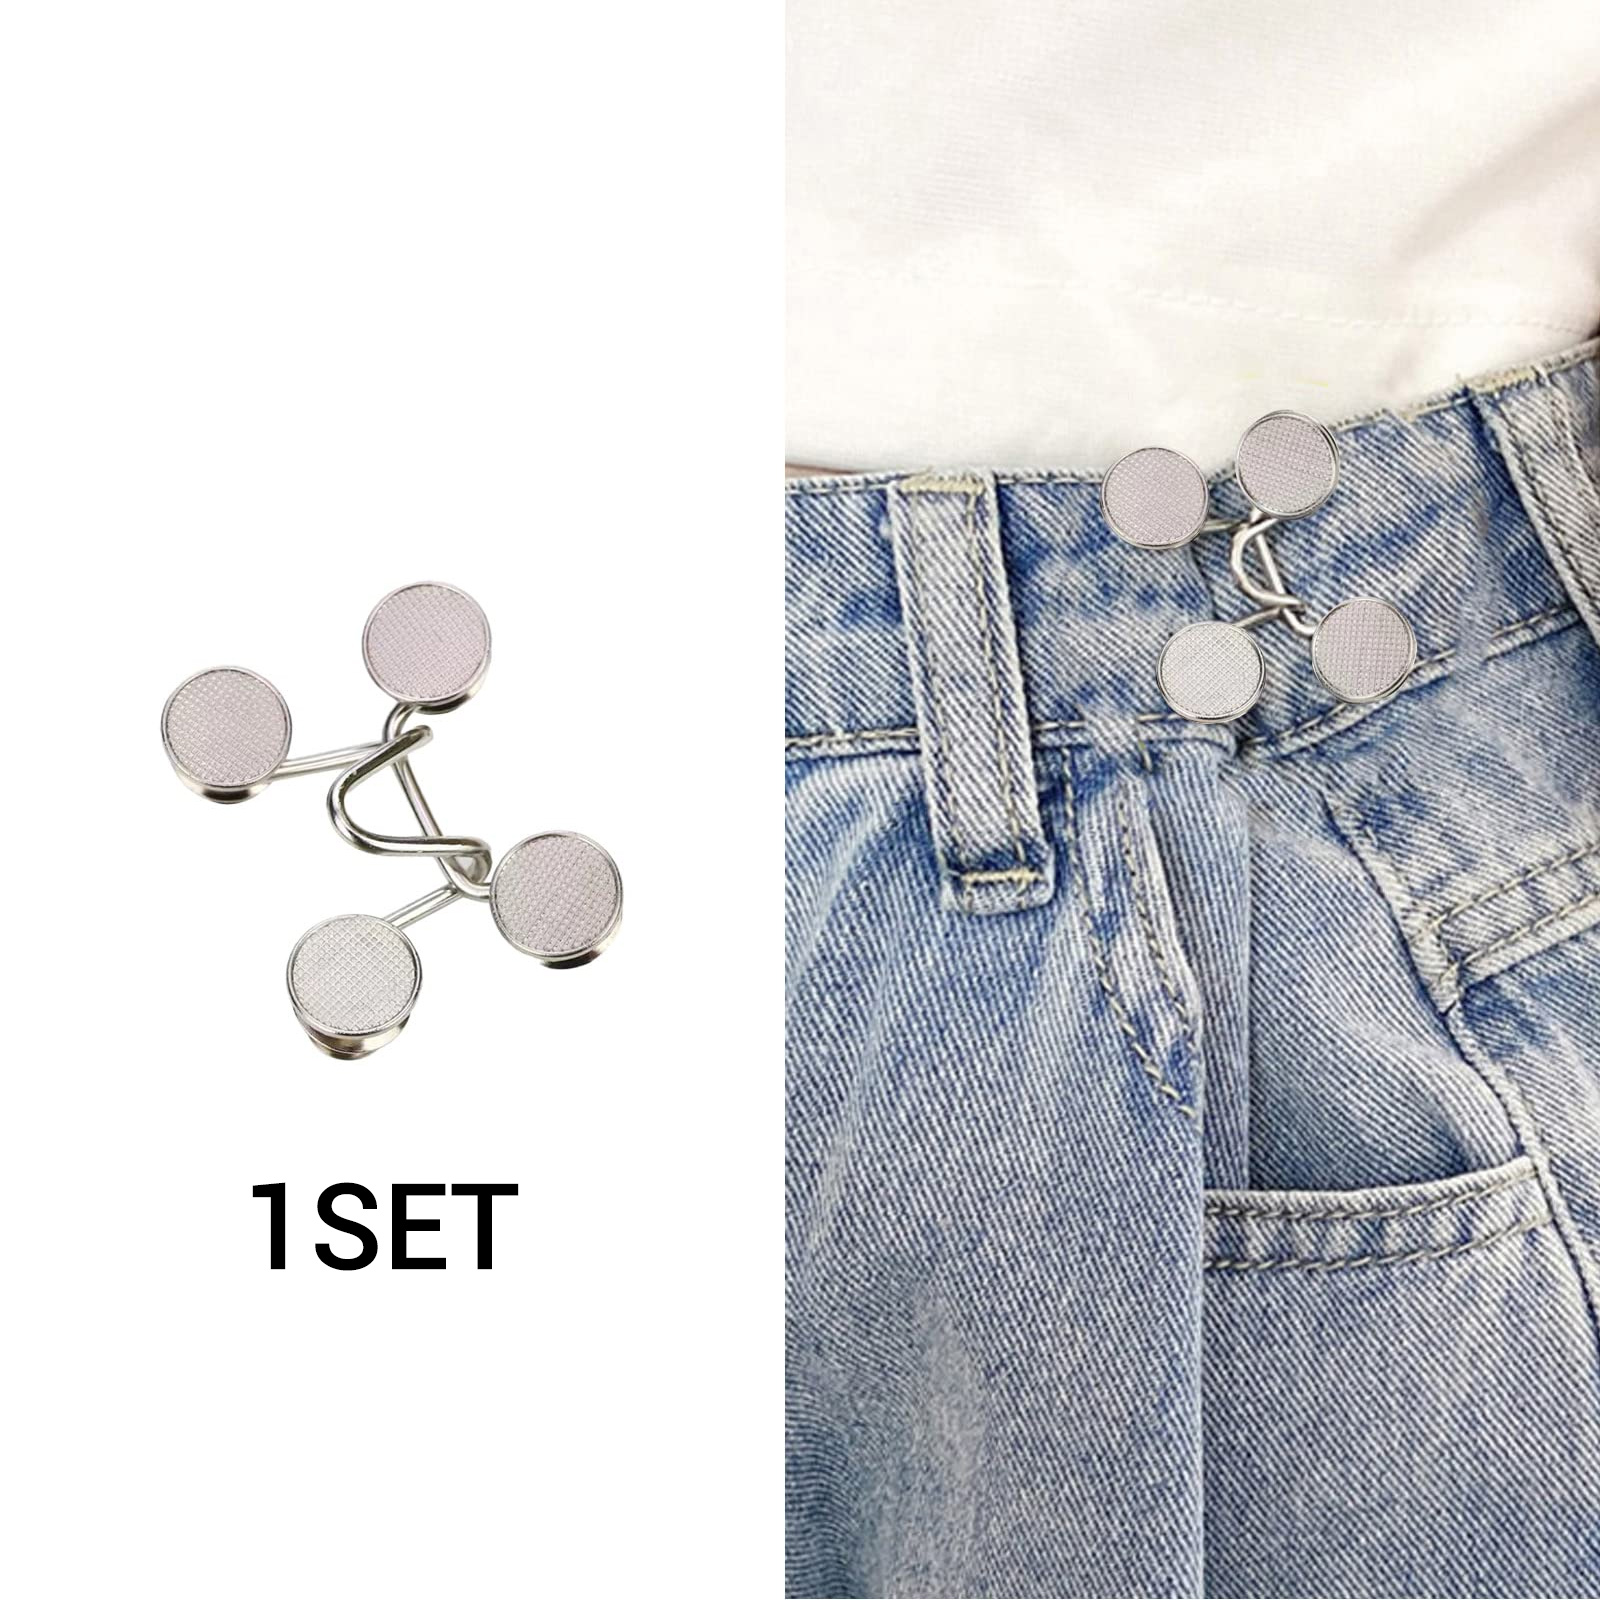 Pant Waist Tightener - Pants Button Buckle Adjuster Adjustable Waist  Tightener - Pants Clips to Tighten Waist, Jean Buttons for Loose Jeans, for